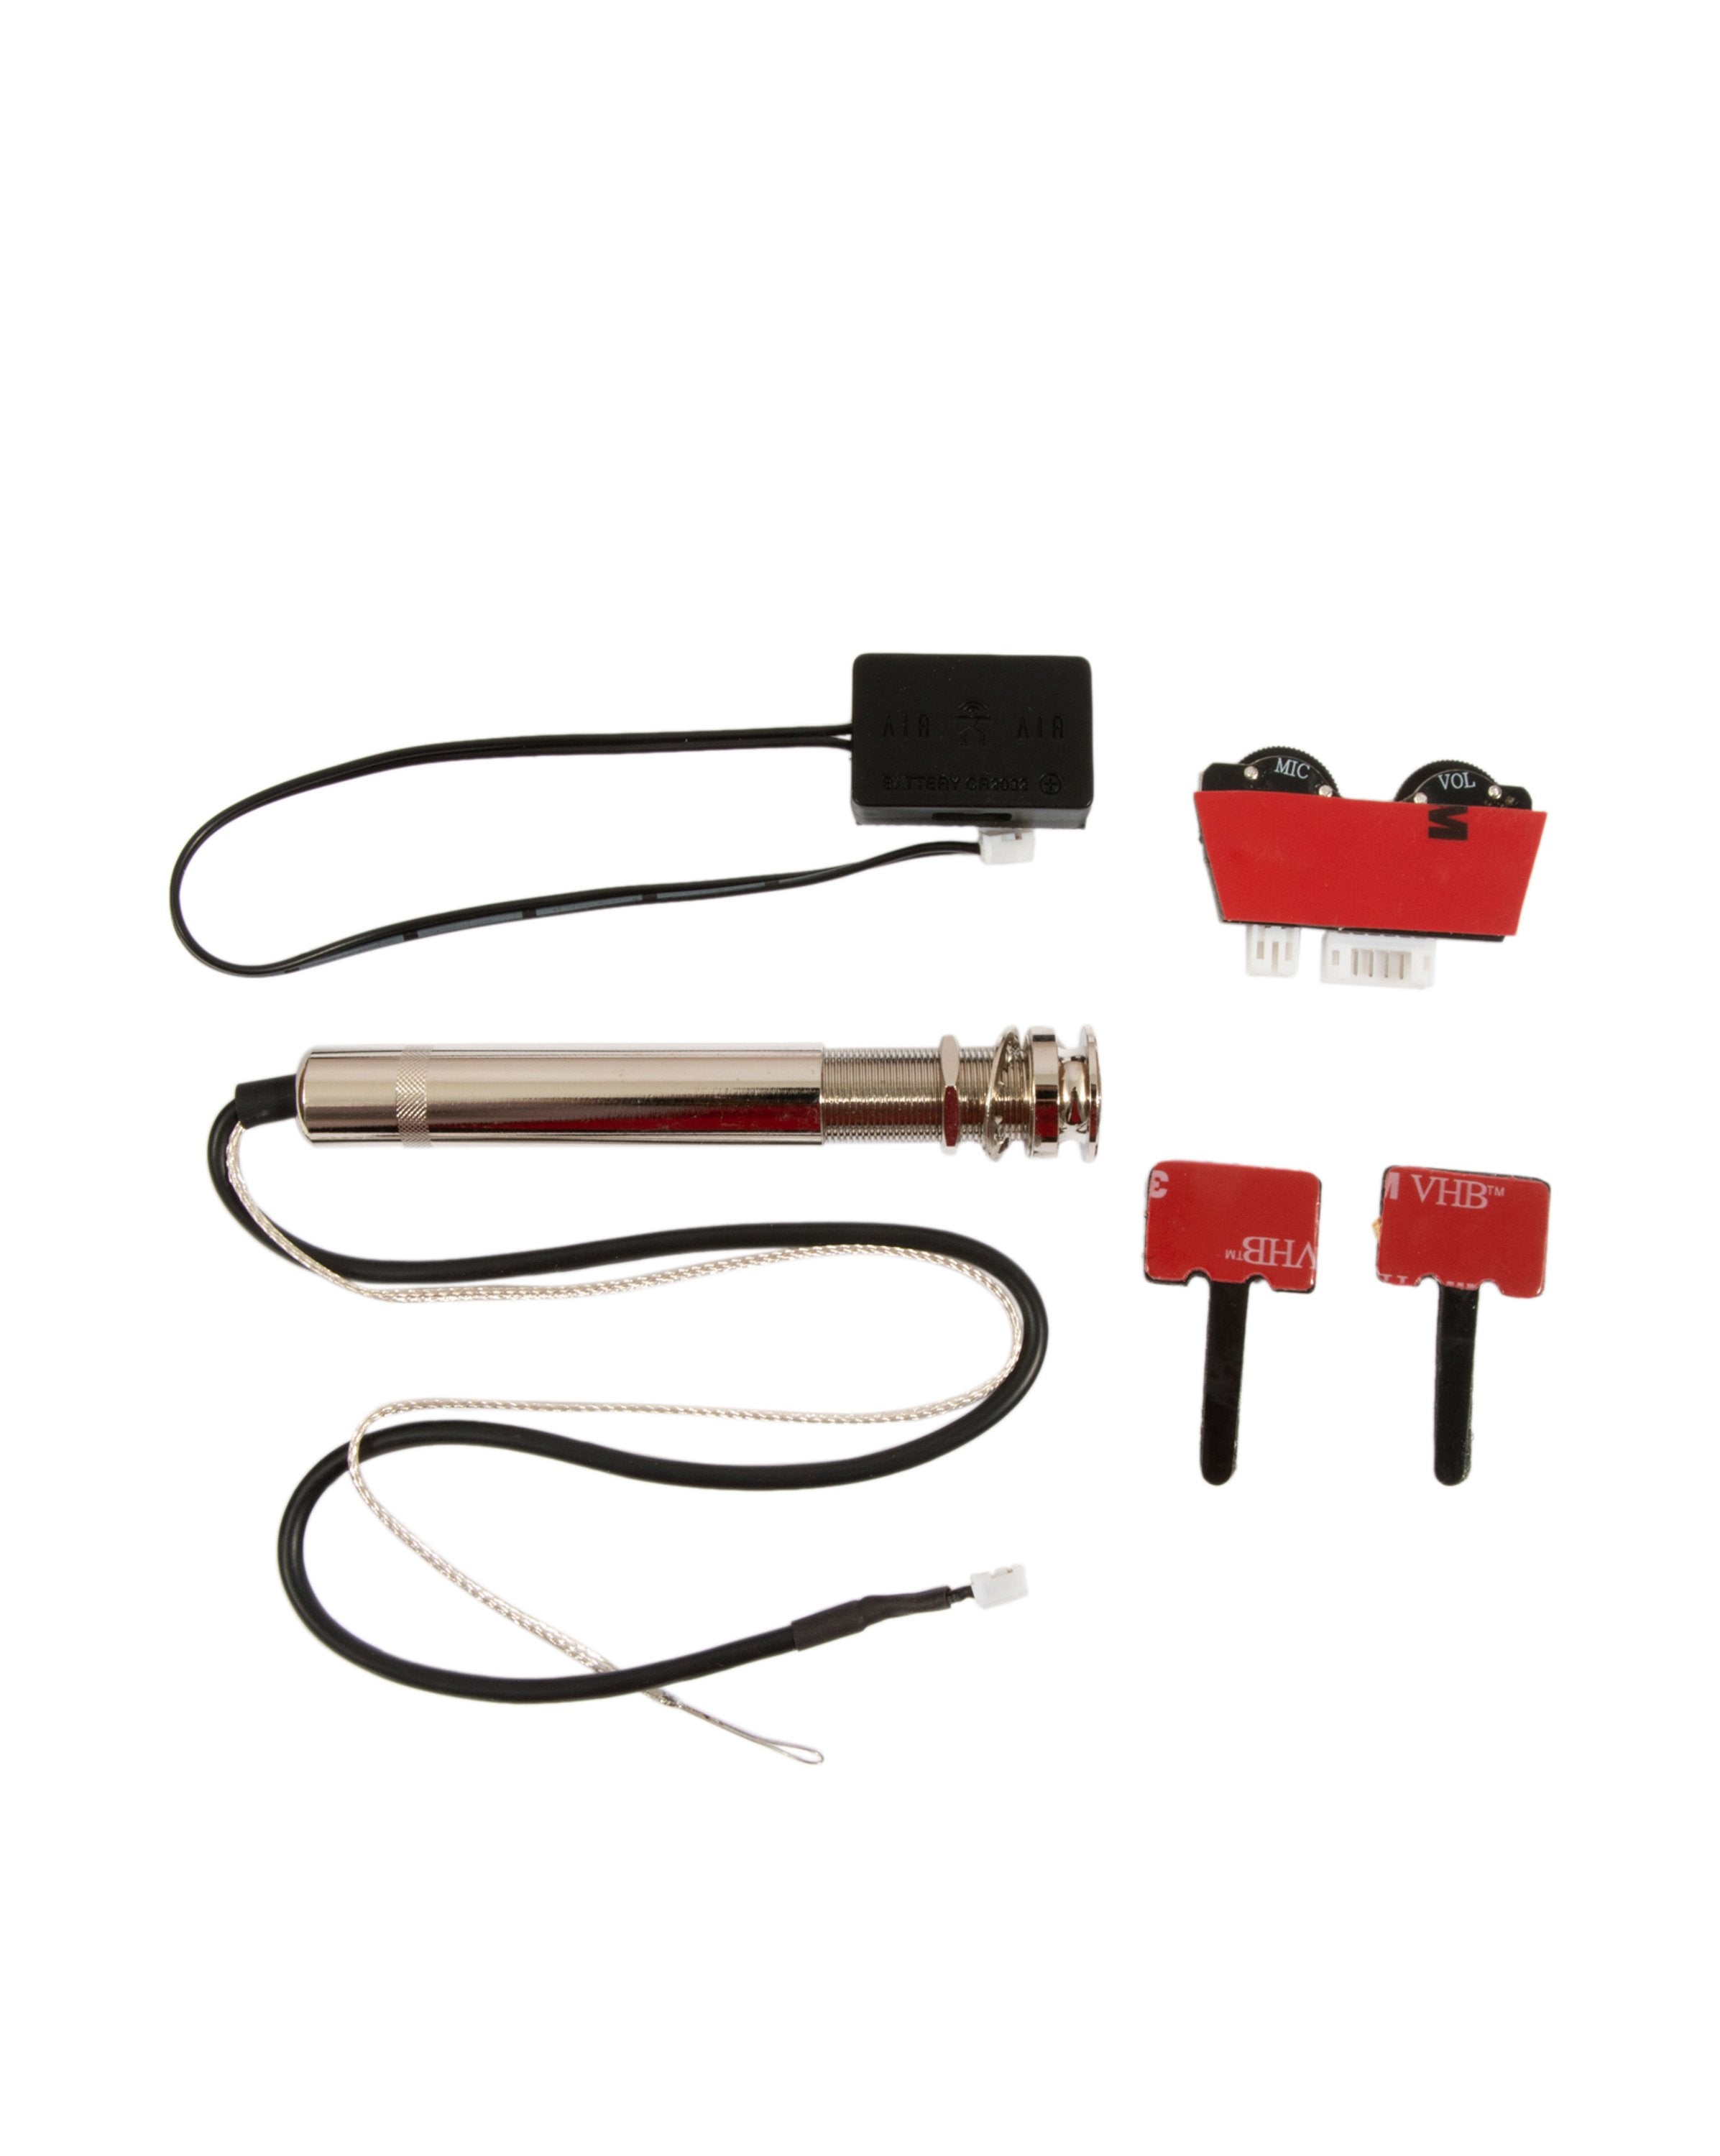 ANueNue Air Air Ukulele Pickup with Piezo and Mic (INSTALLED)